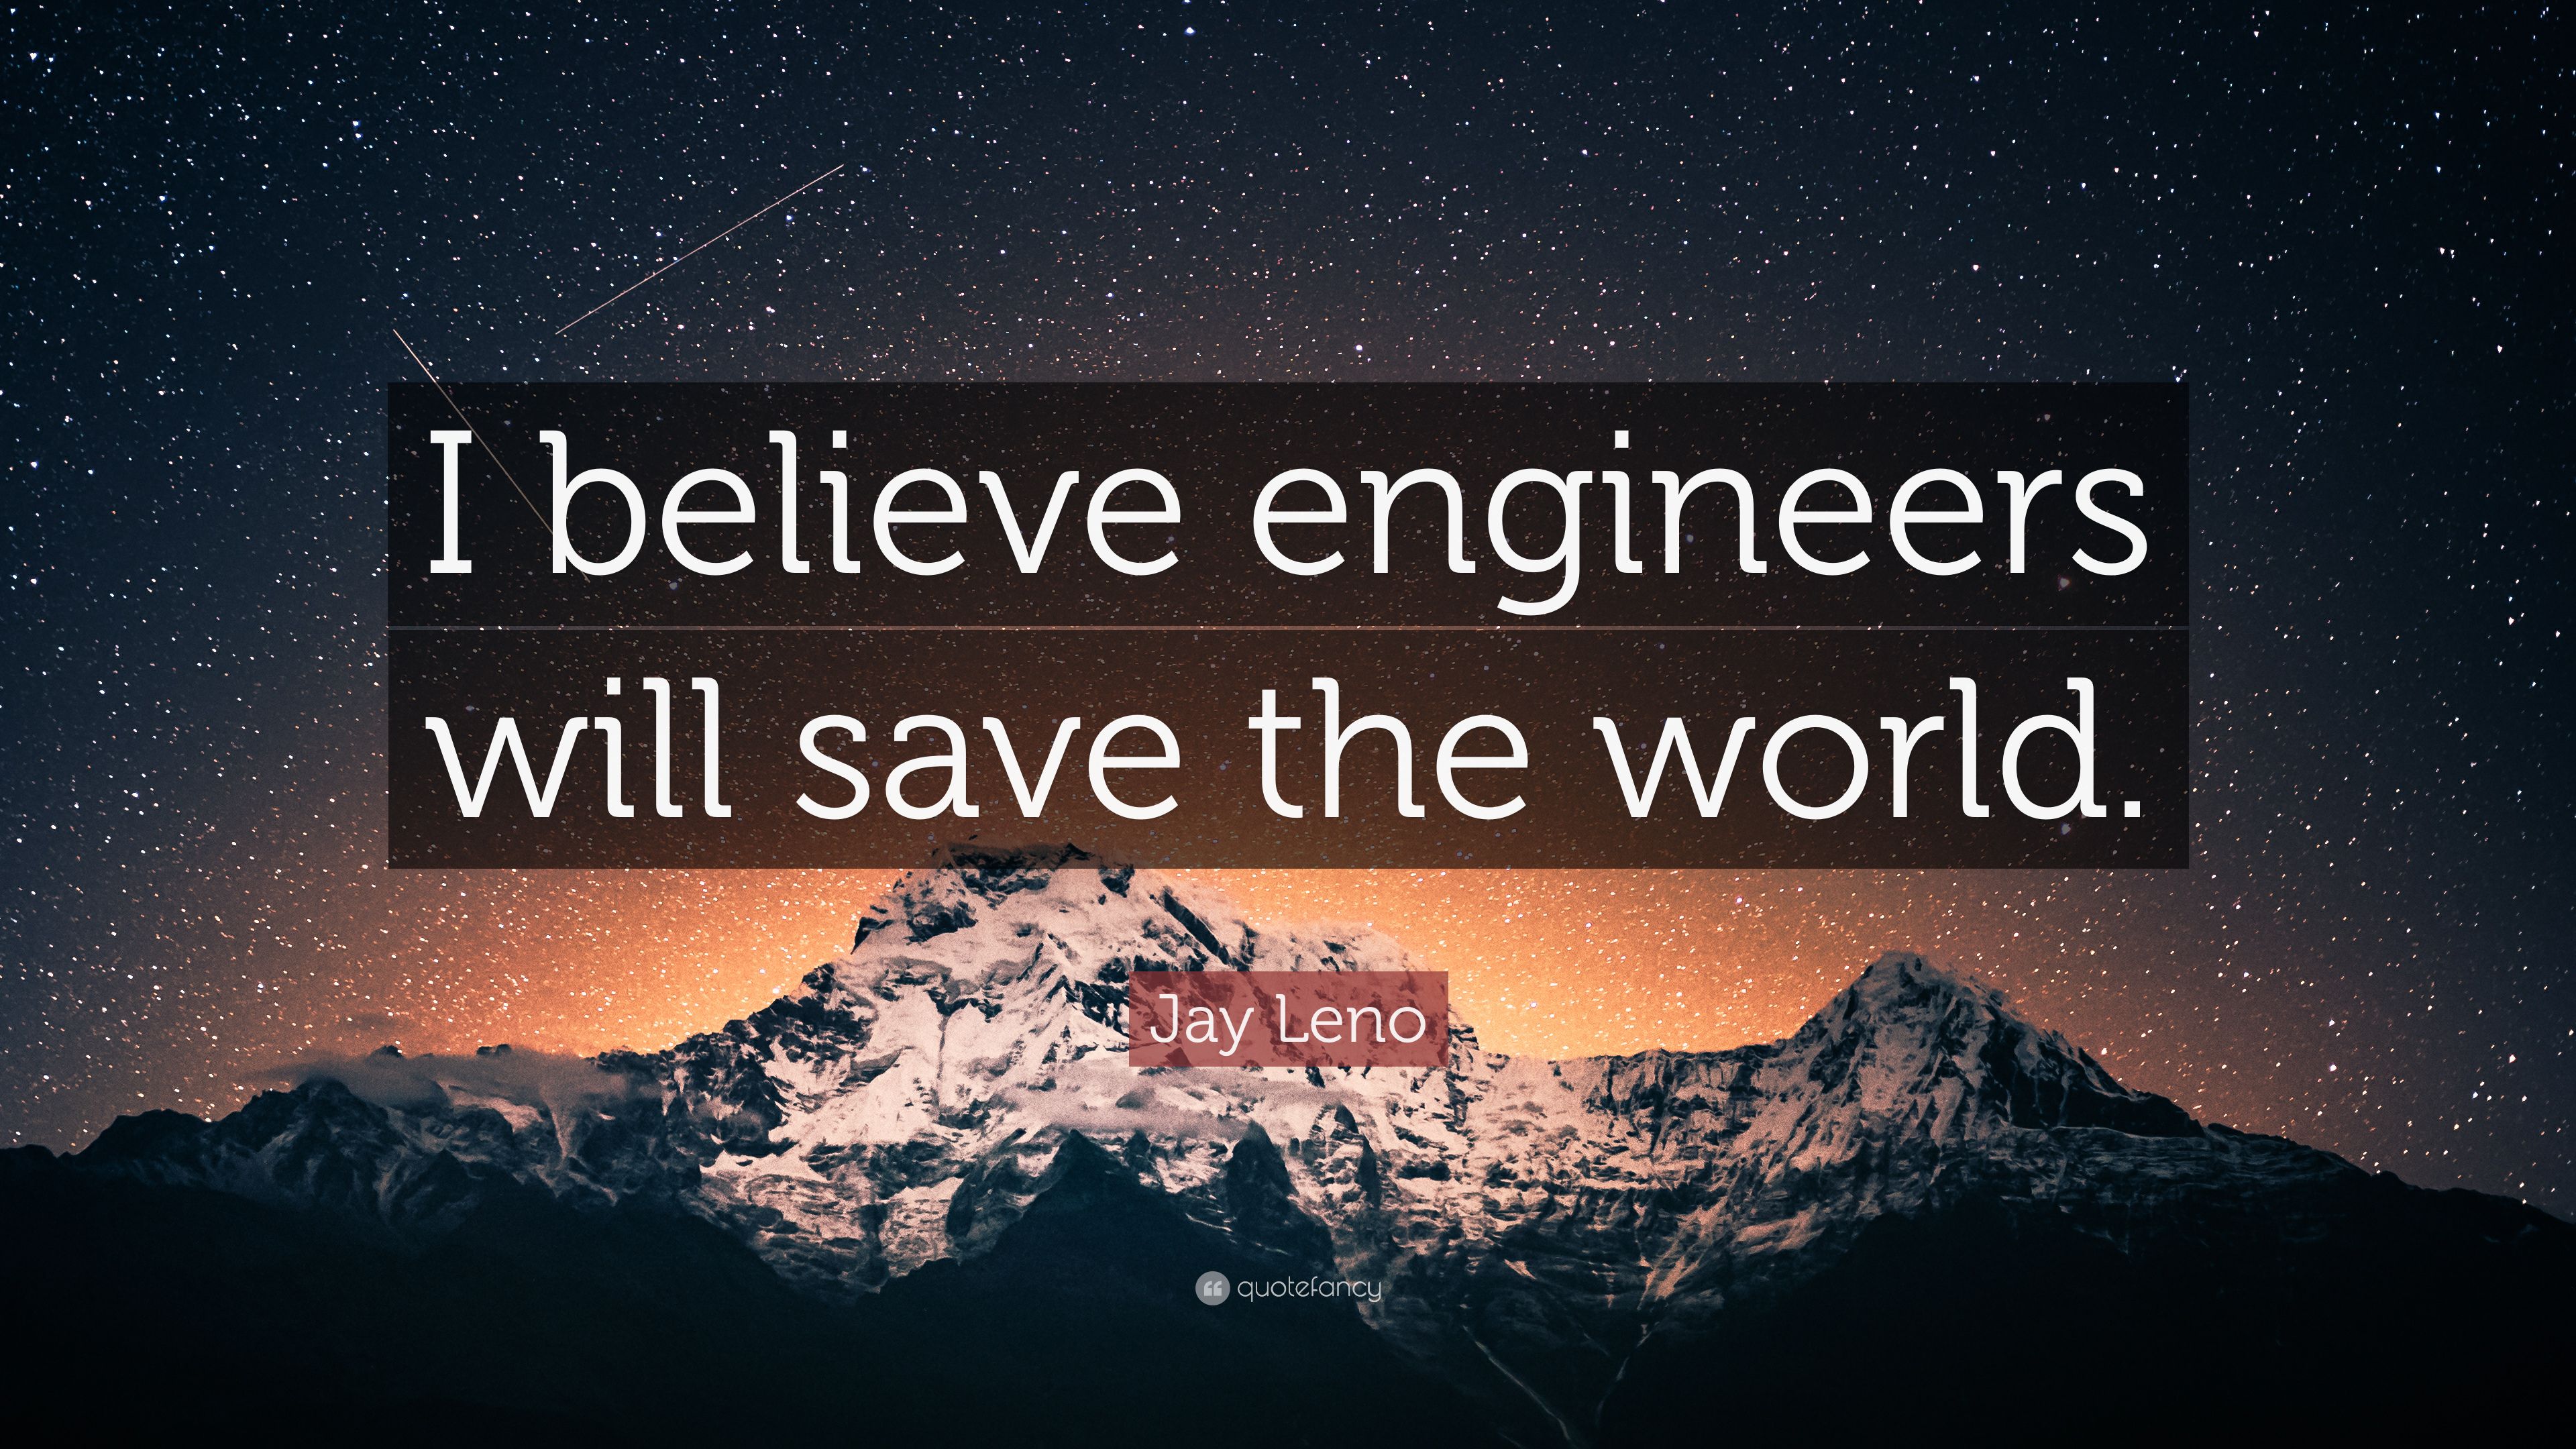 Jay Leno Quote: “I believe engineers will save the world.” 7